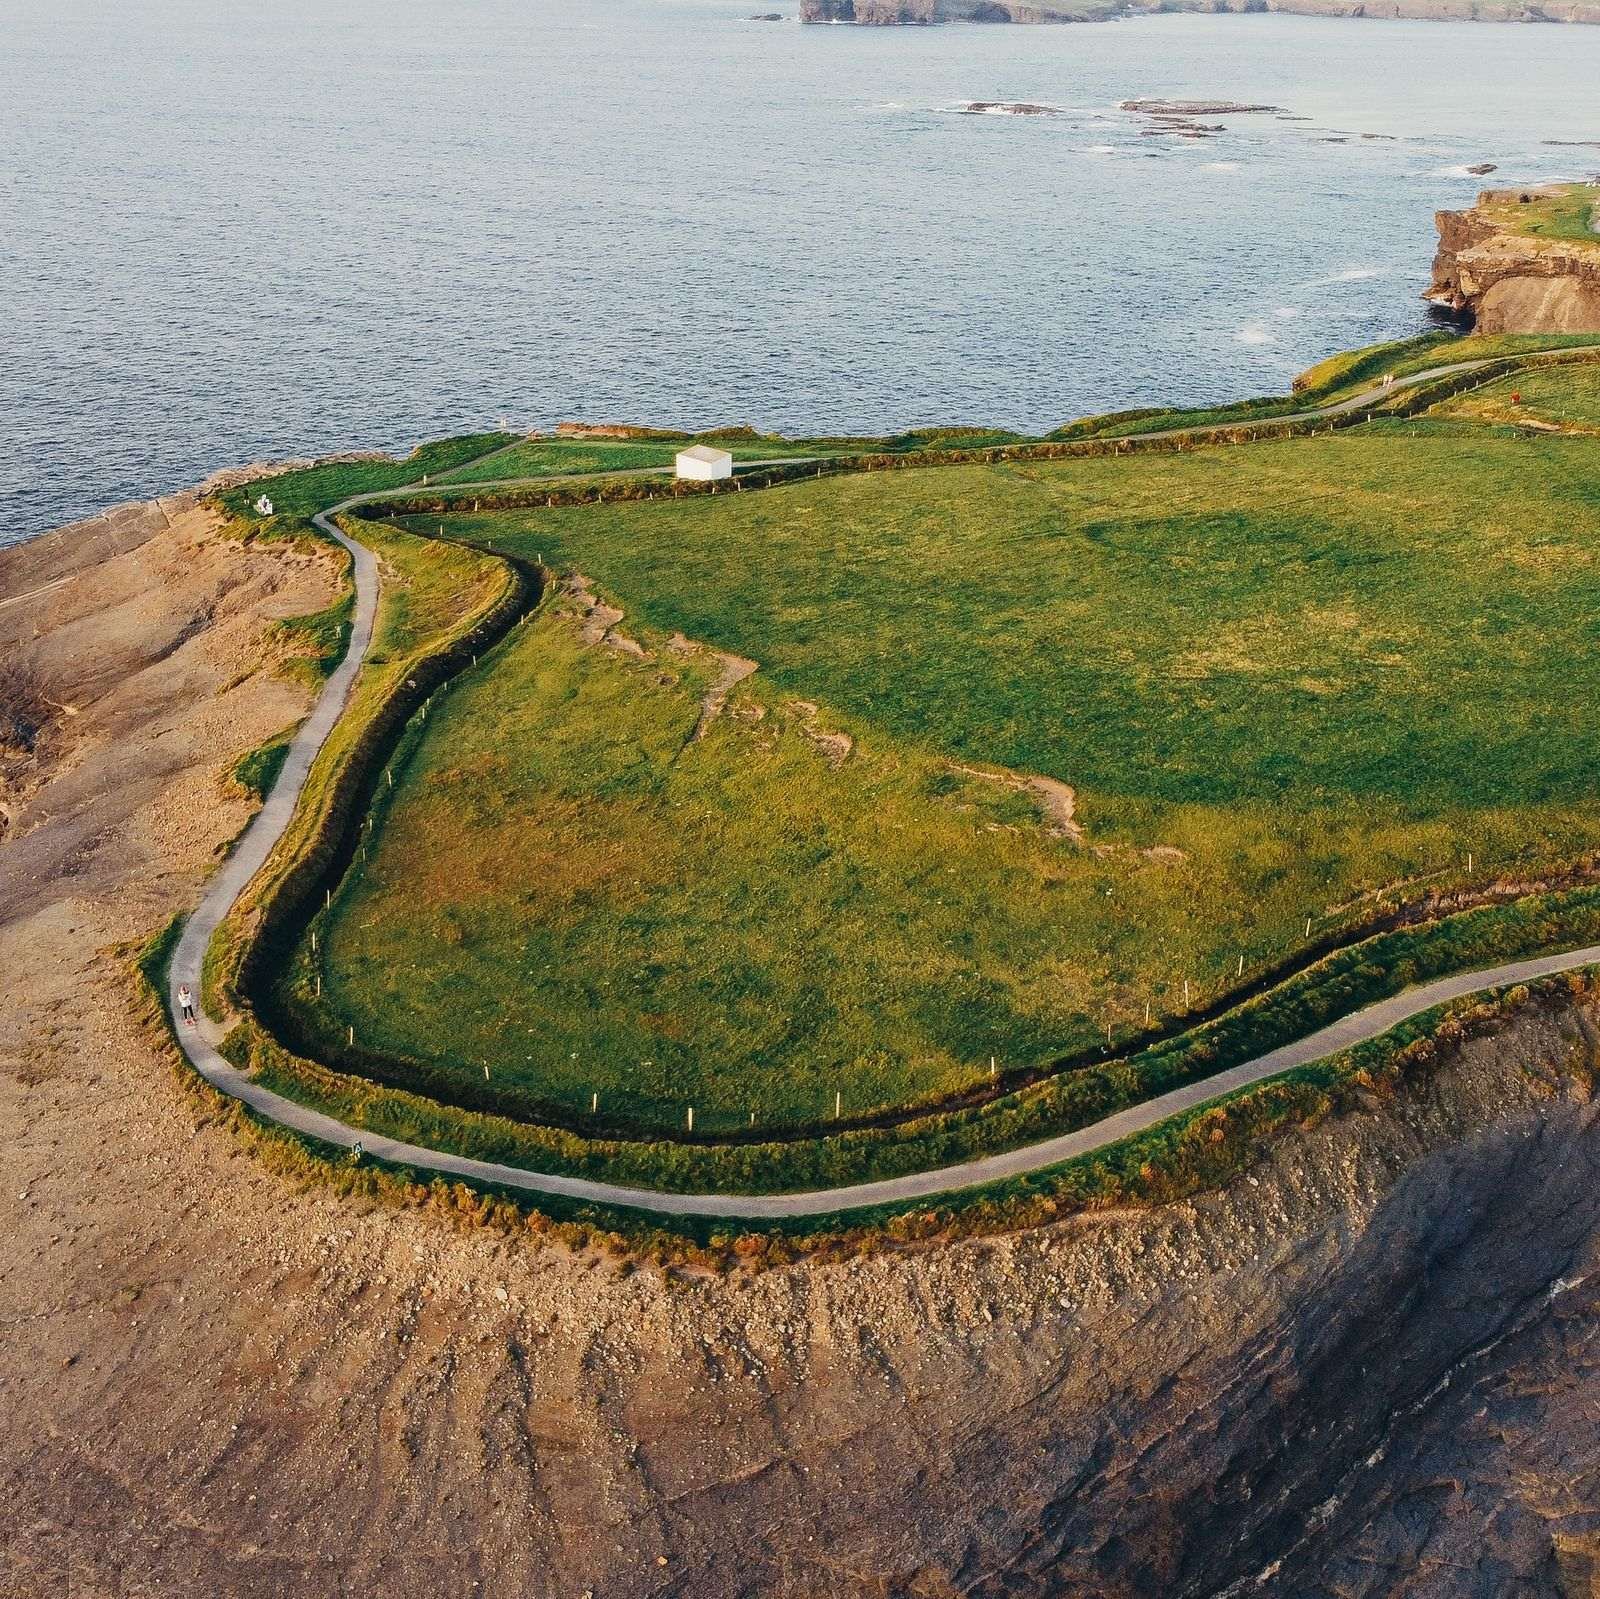 Drone shot of the Kilkee cliffs